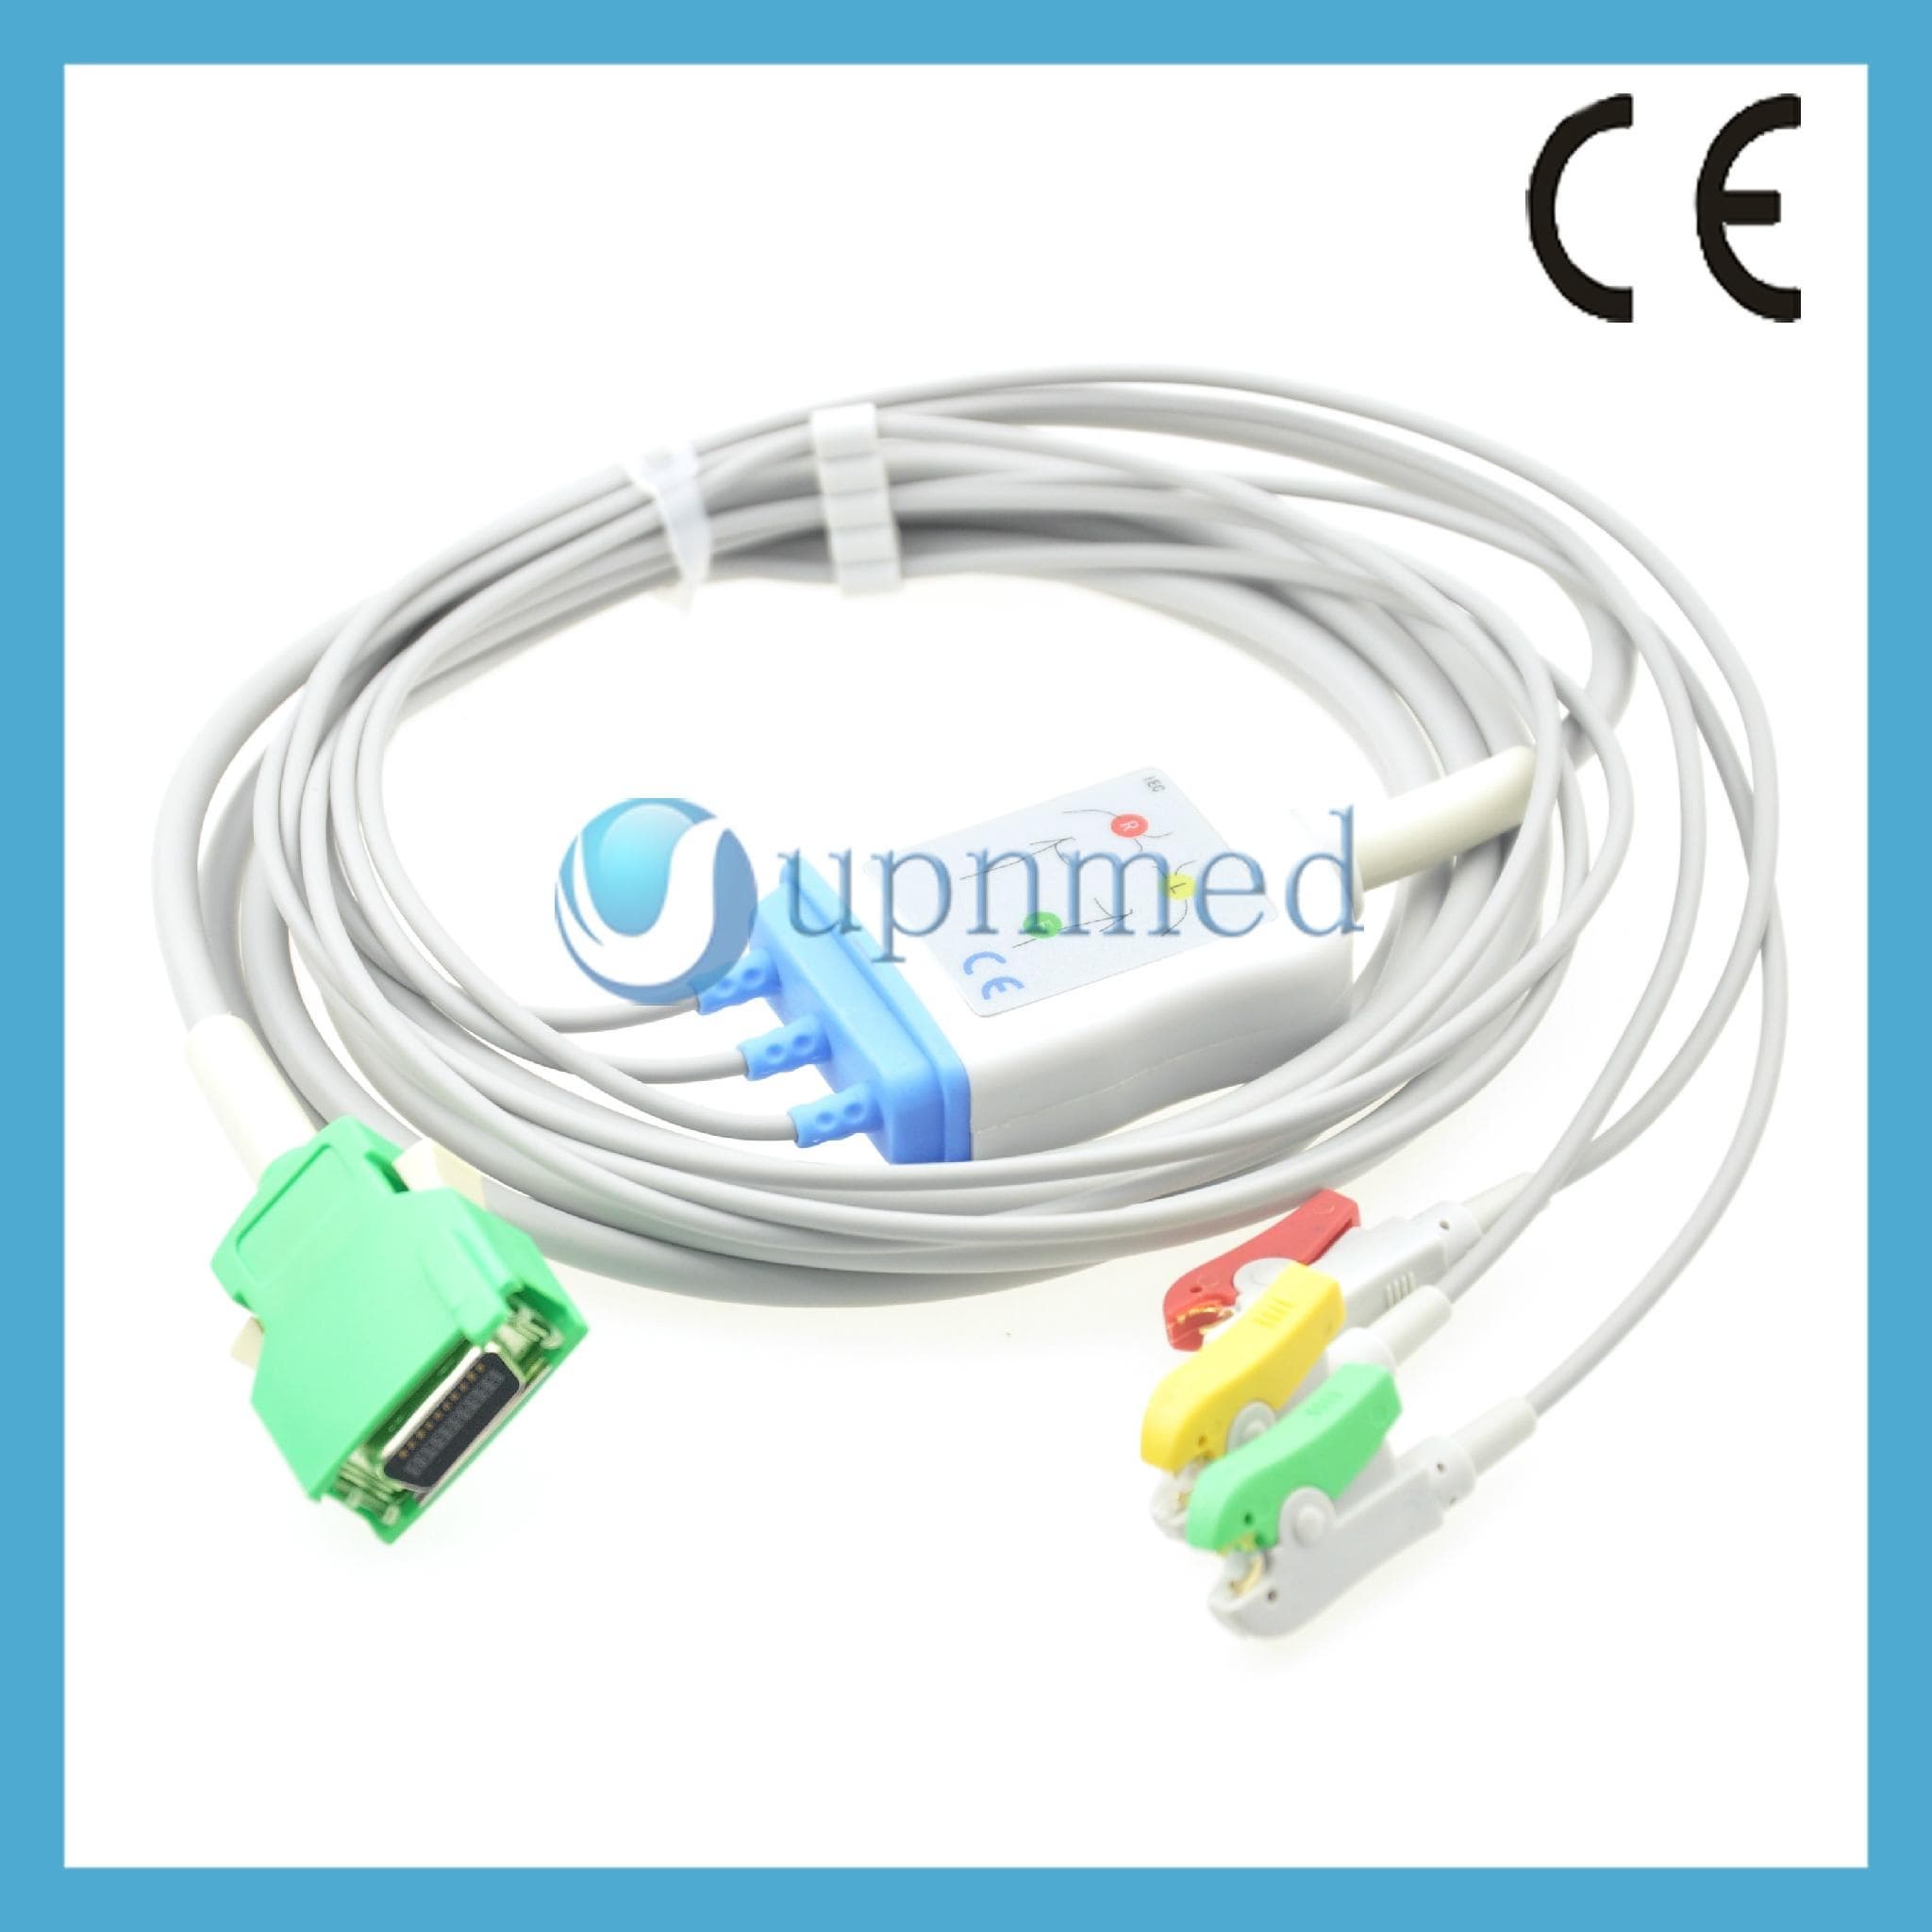 Nihon Kohden 20pin ECG cable with 3 lead wire